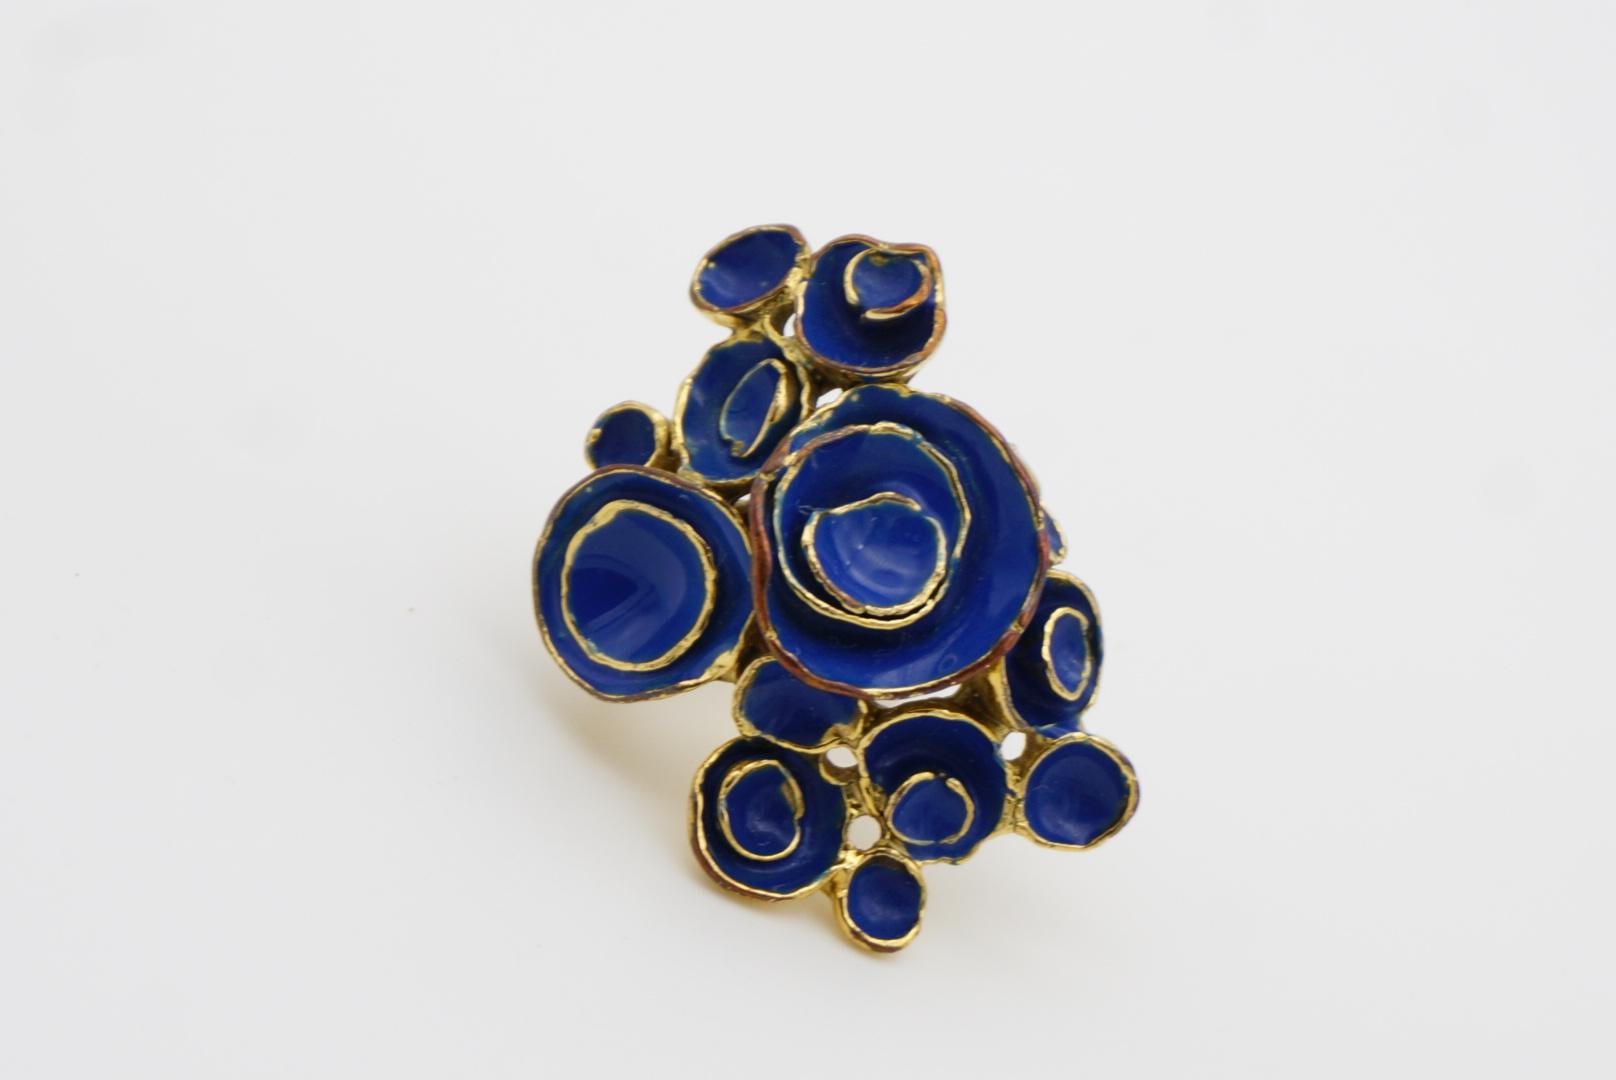 Yves Saint Laurent YSL Arty Navy Cluster Flowers Statement Chunky Ring, Size 6 For Sale 2